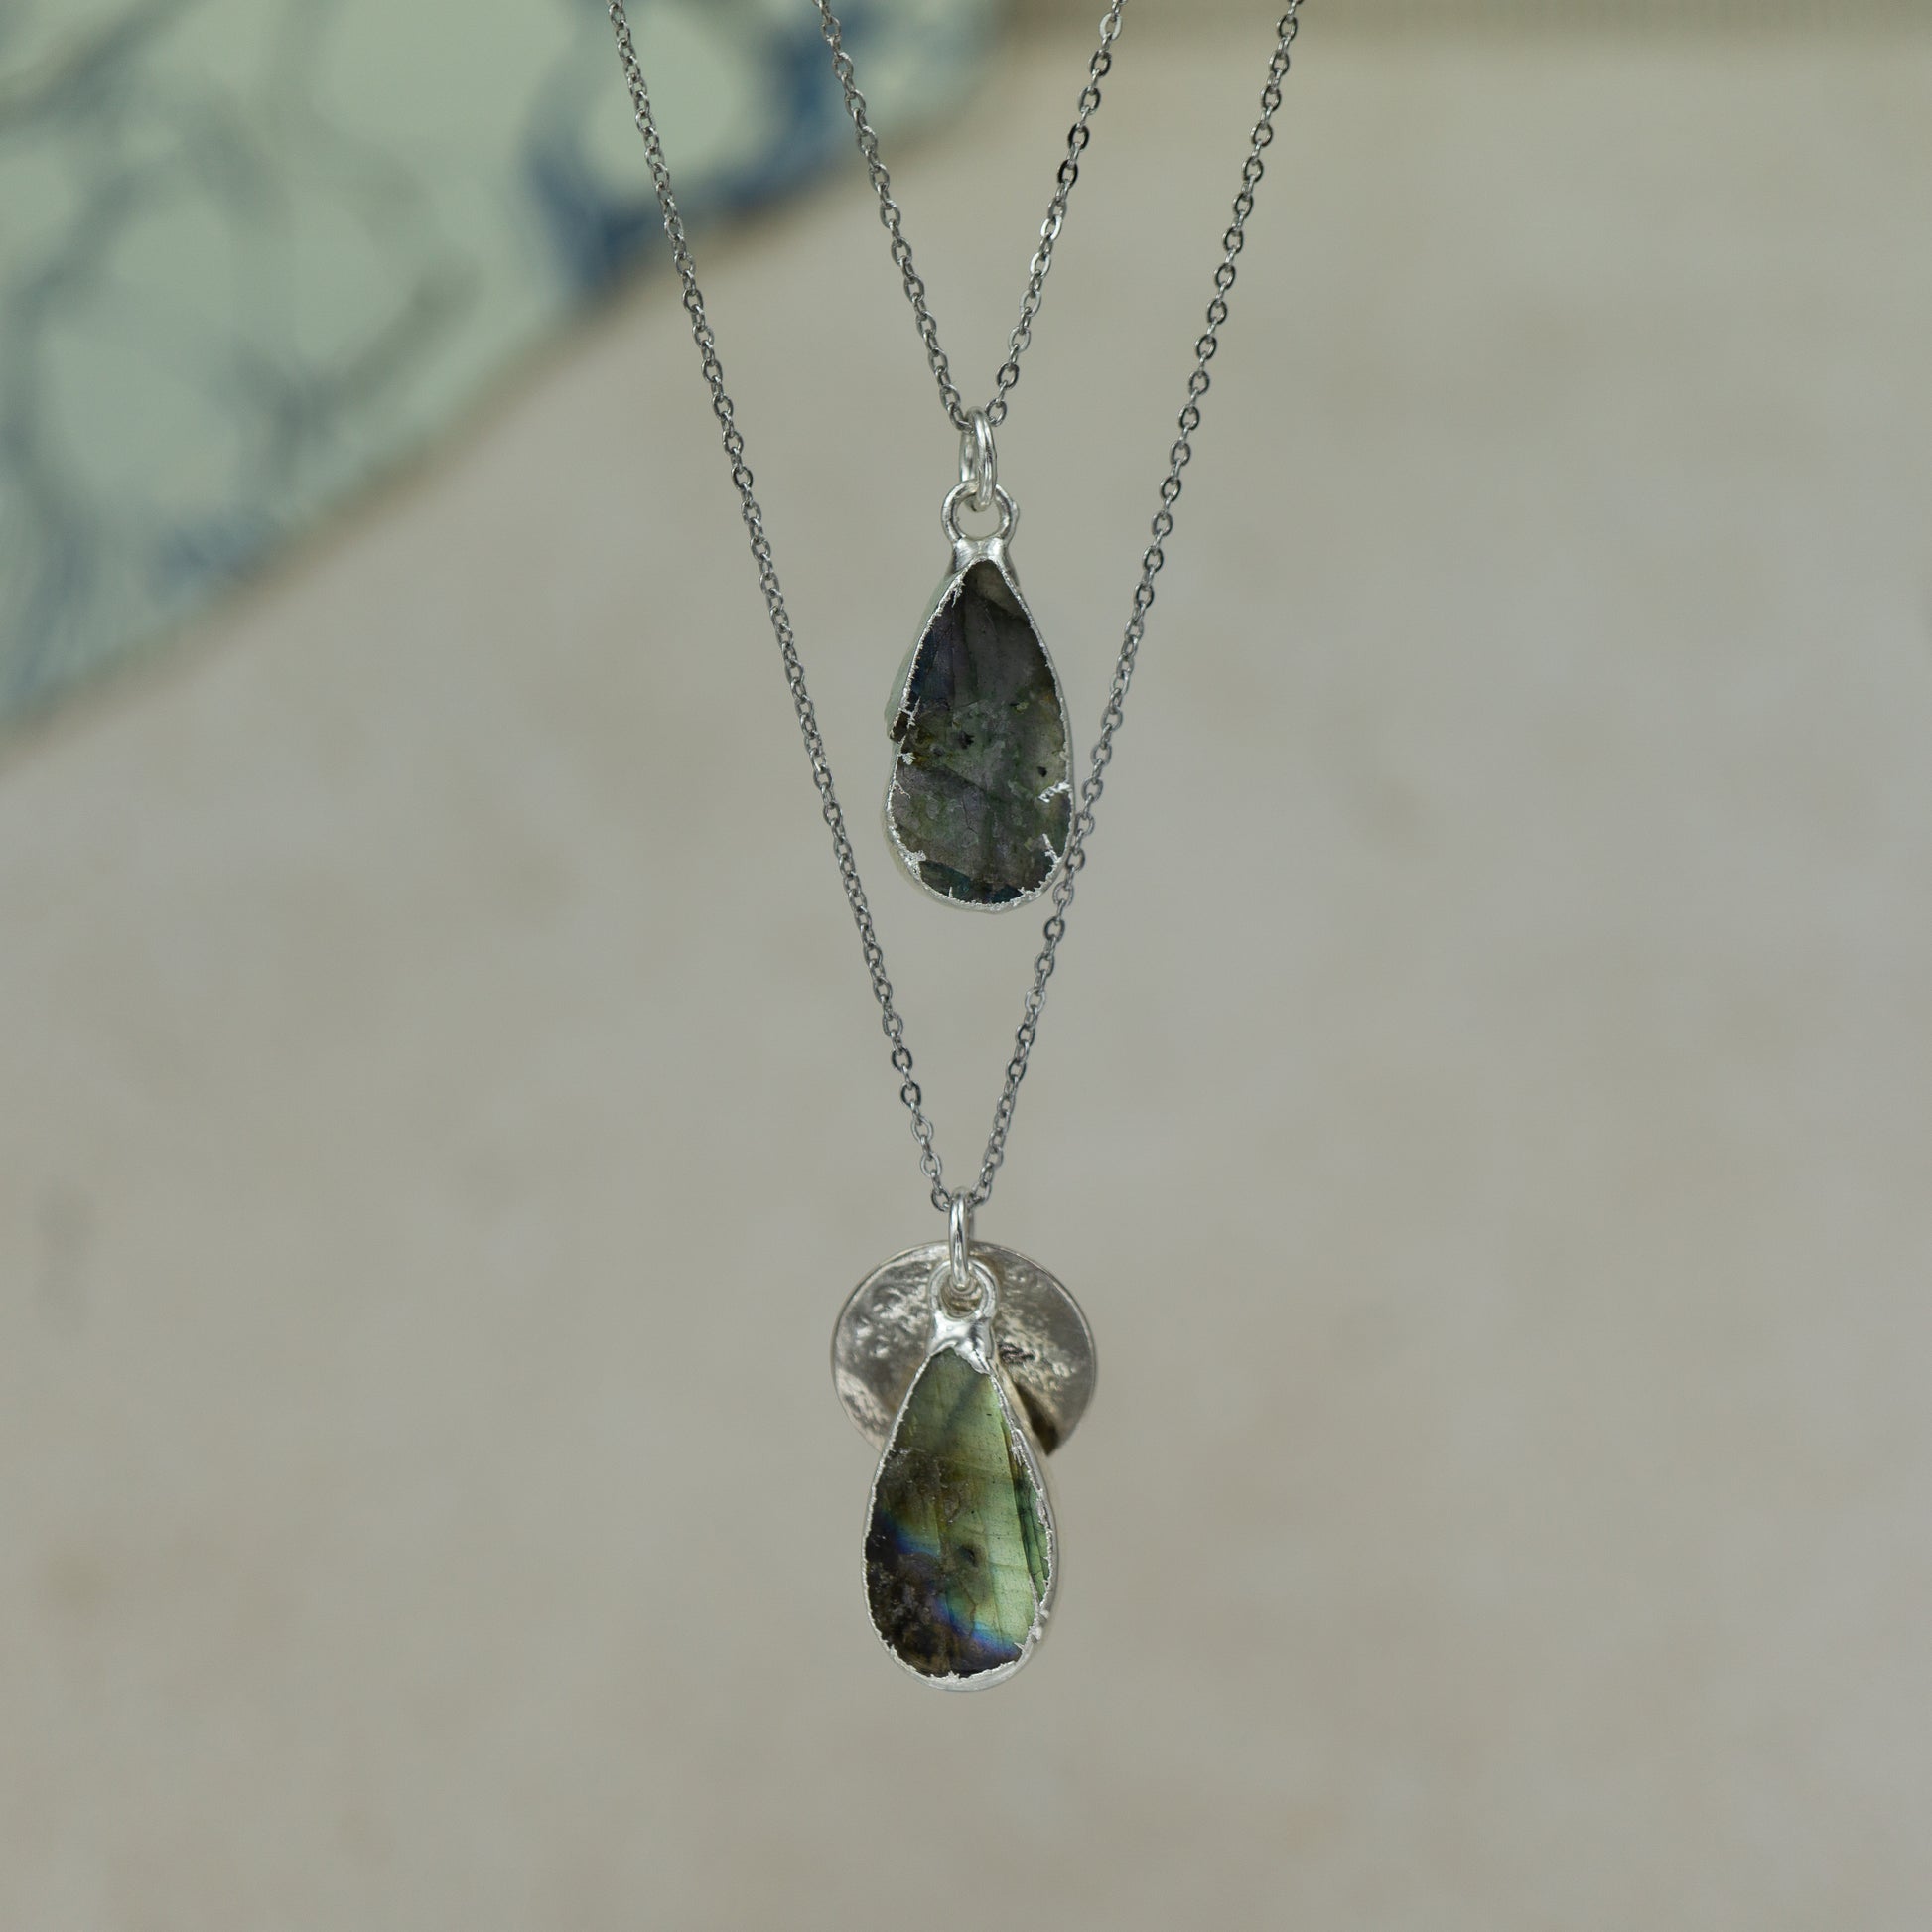 single teardrop raw labradorite pendants finished in gold on a chains.